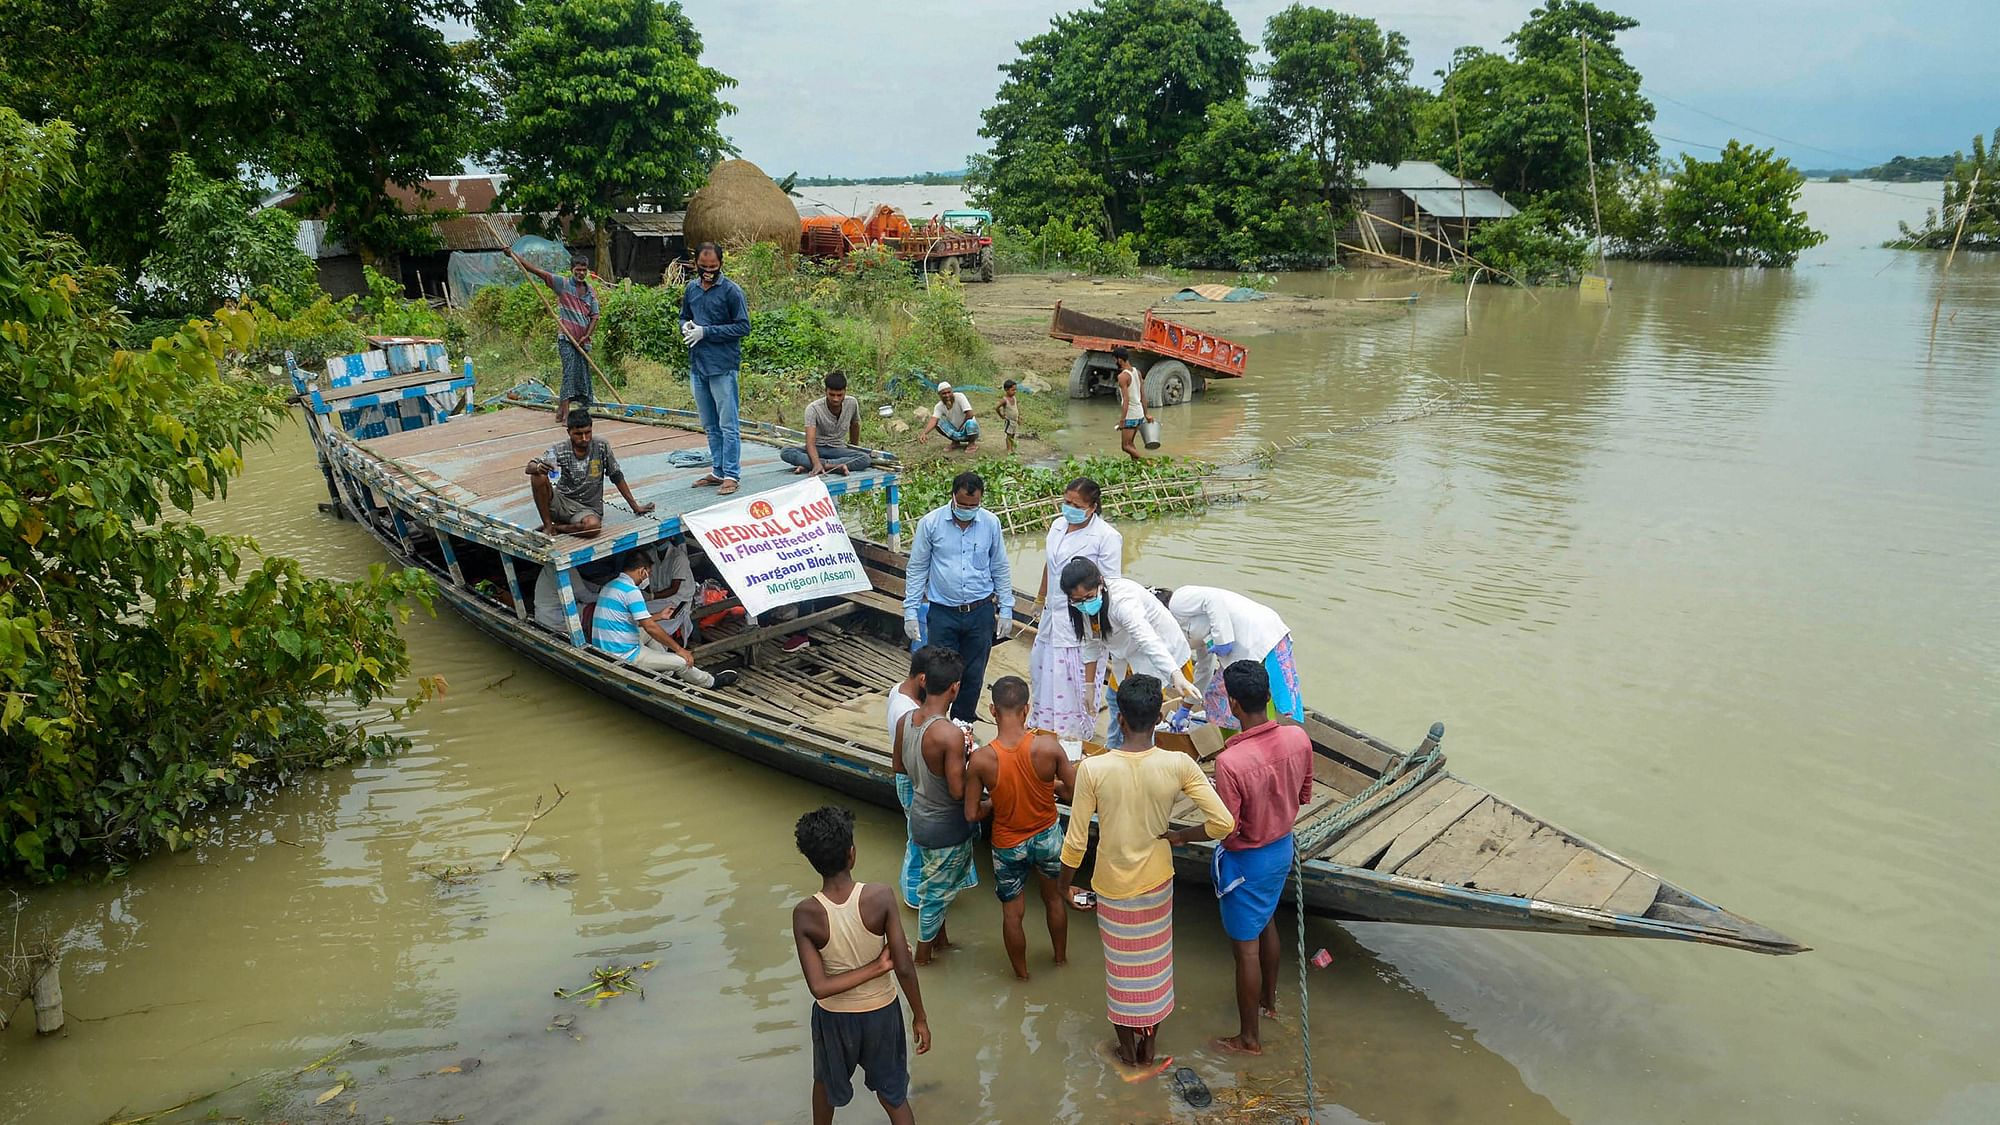 case study on flood in assam and bihar